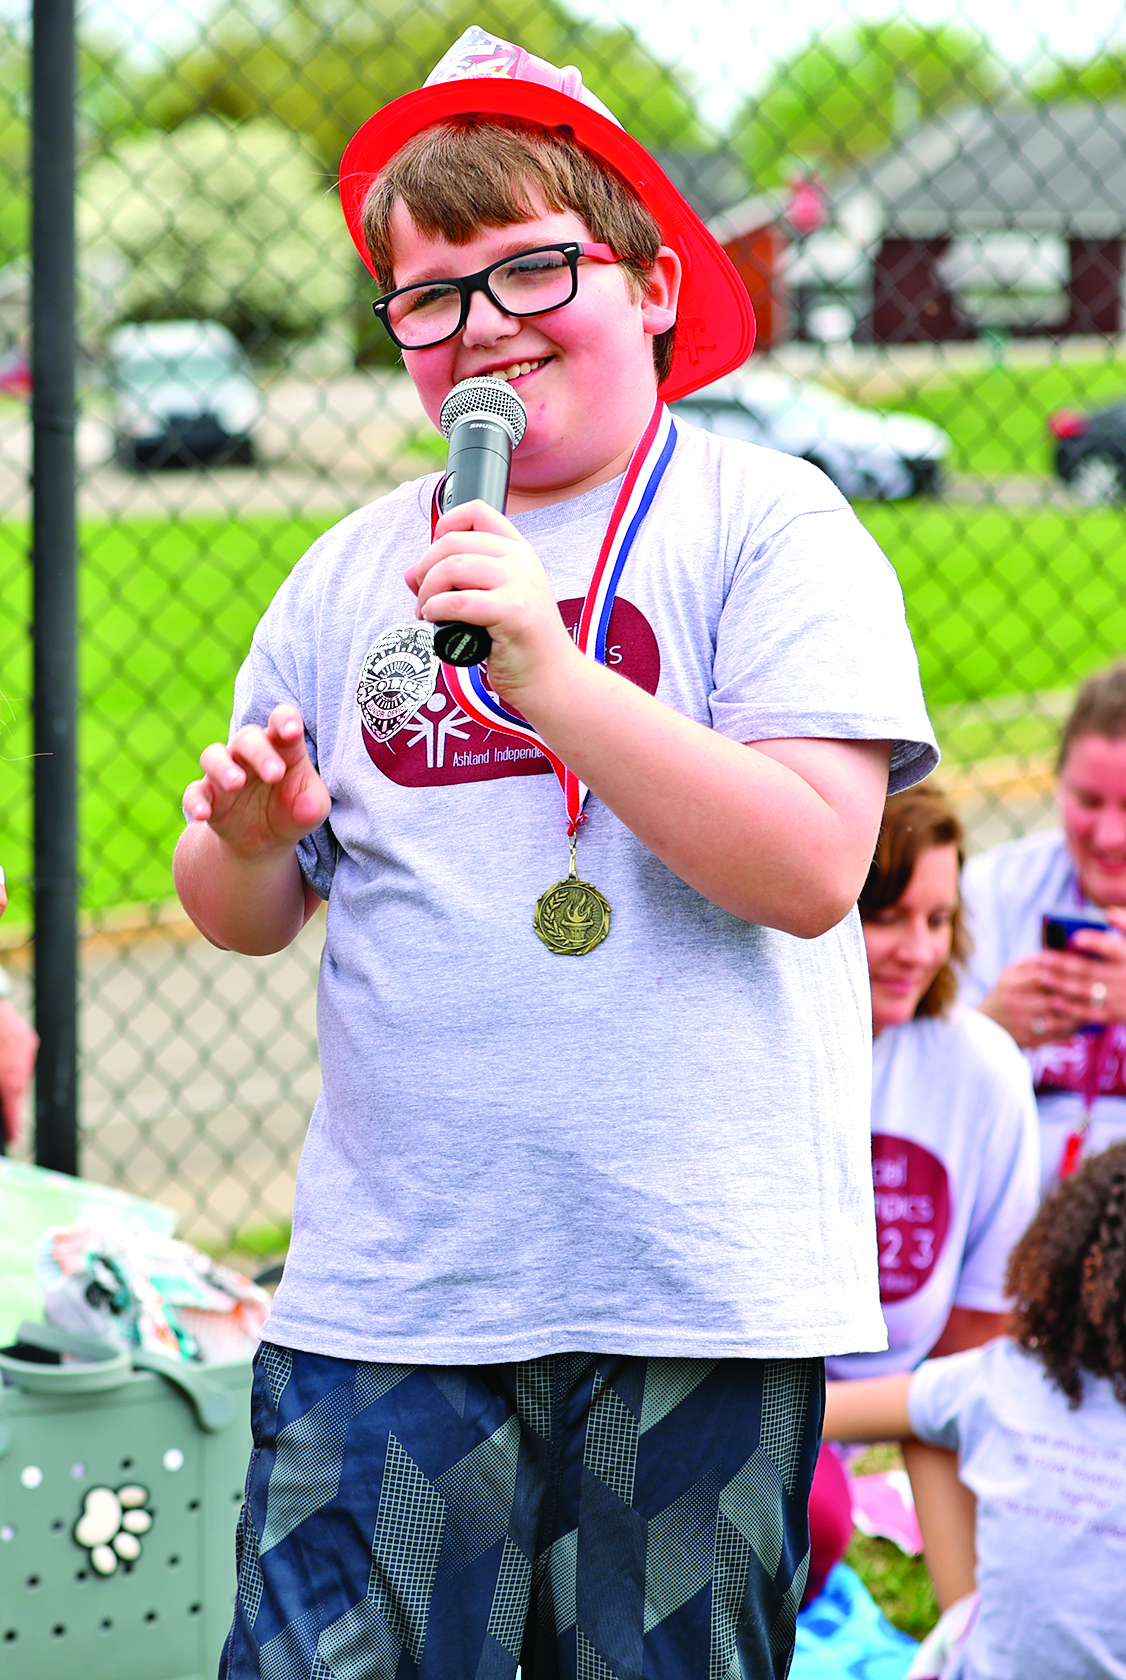 An Awesome Day for Ashland Blazer’s Special Olympics